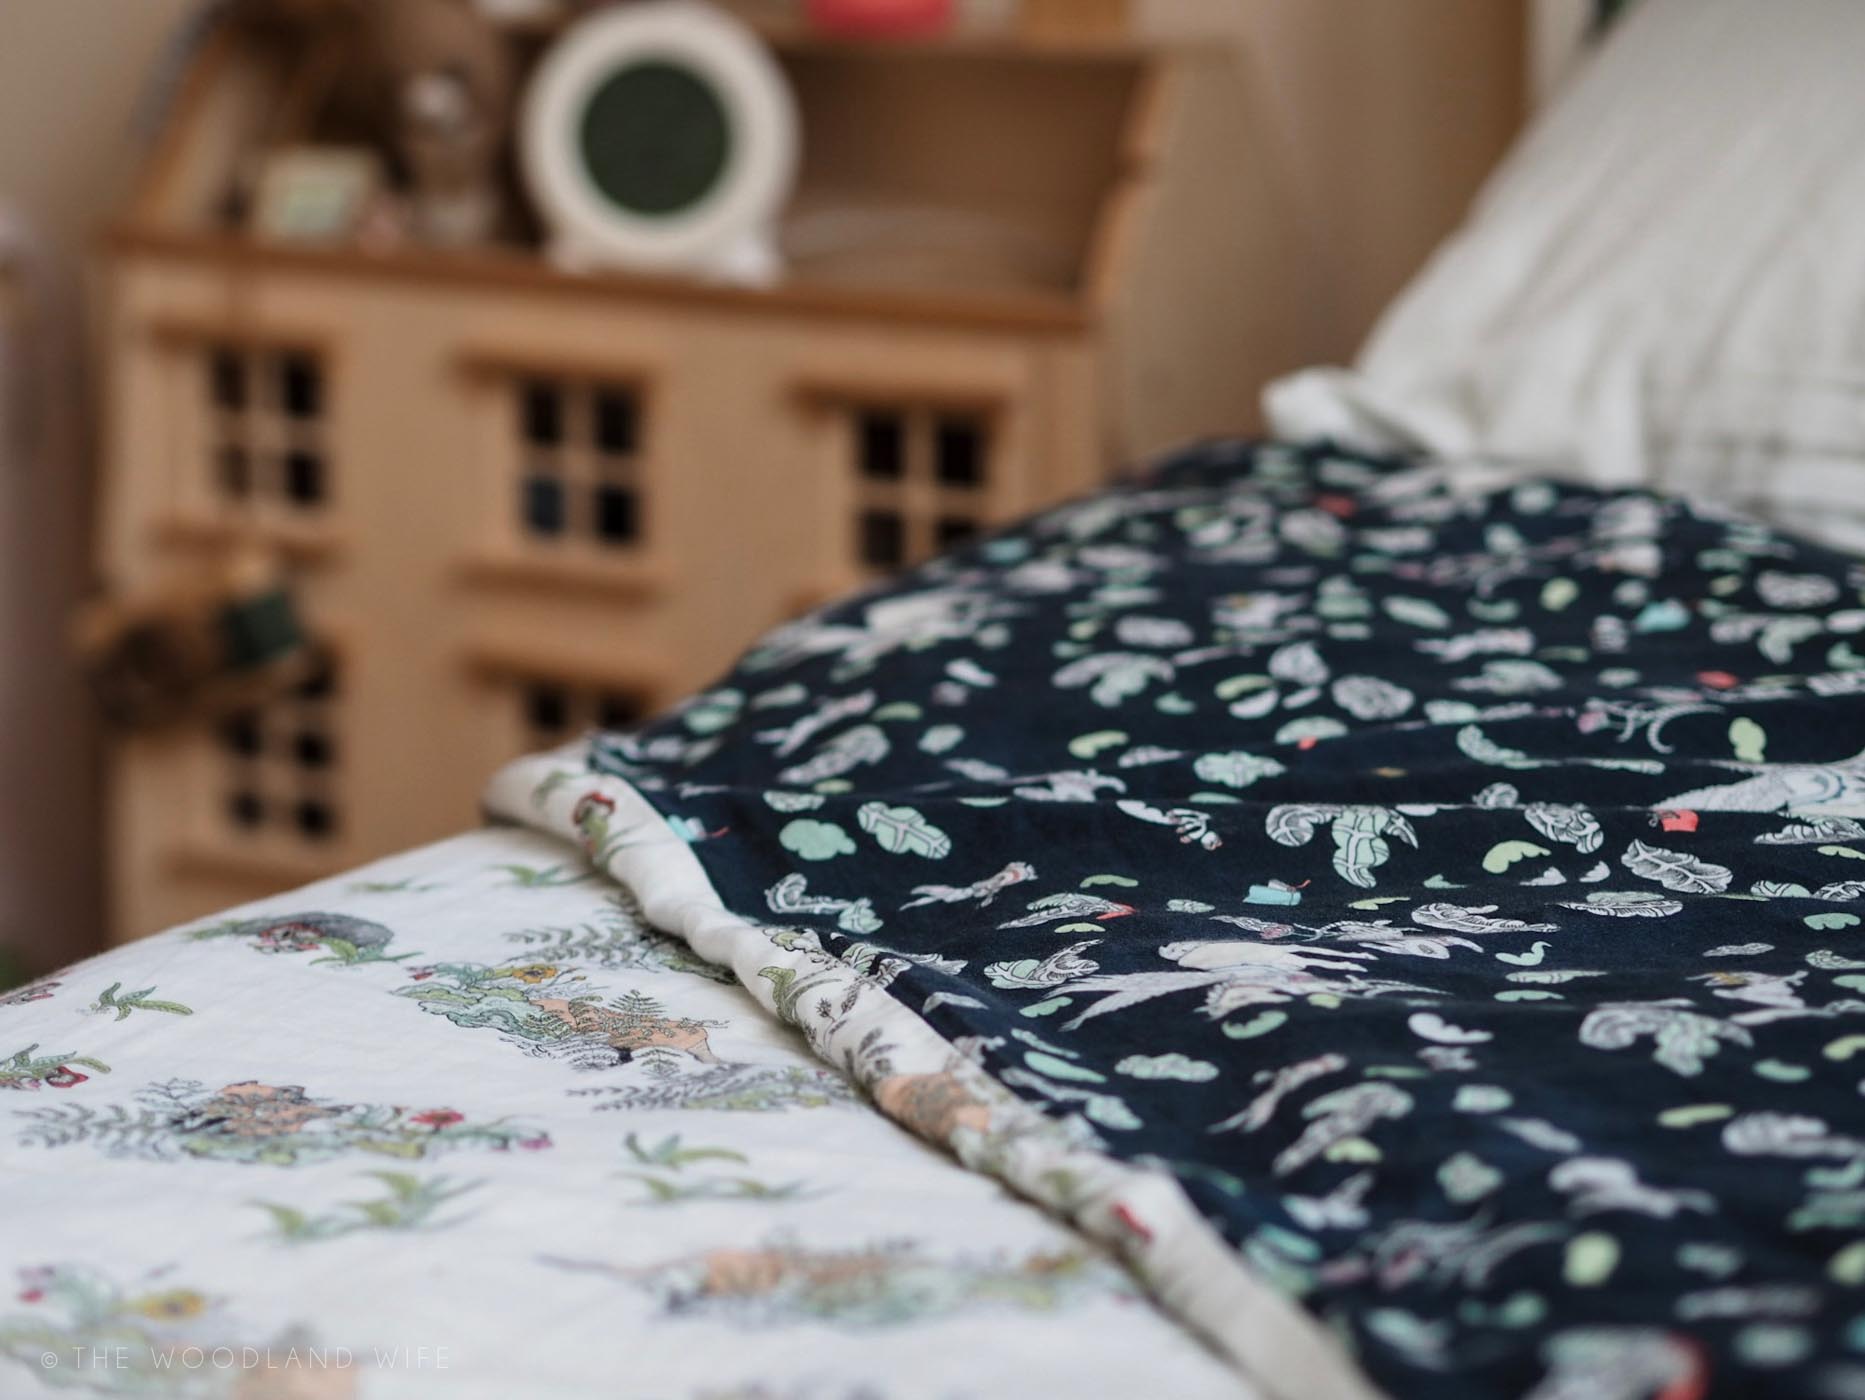 The Woodland Wife - Forivor - Ethical & Organic children's bedding - inspire magical sleep through nature and storytelling